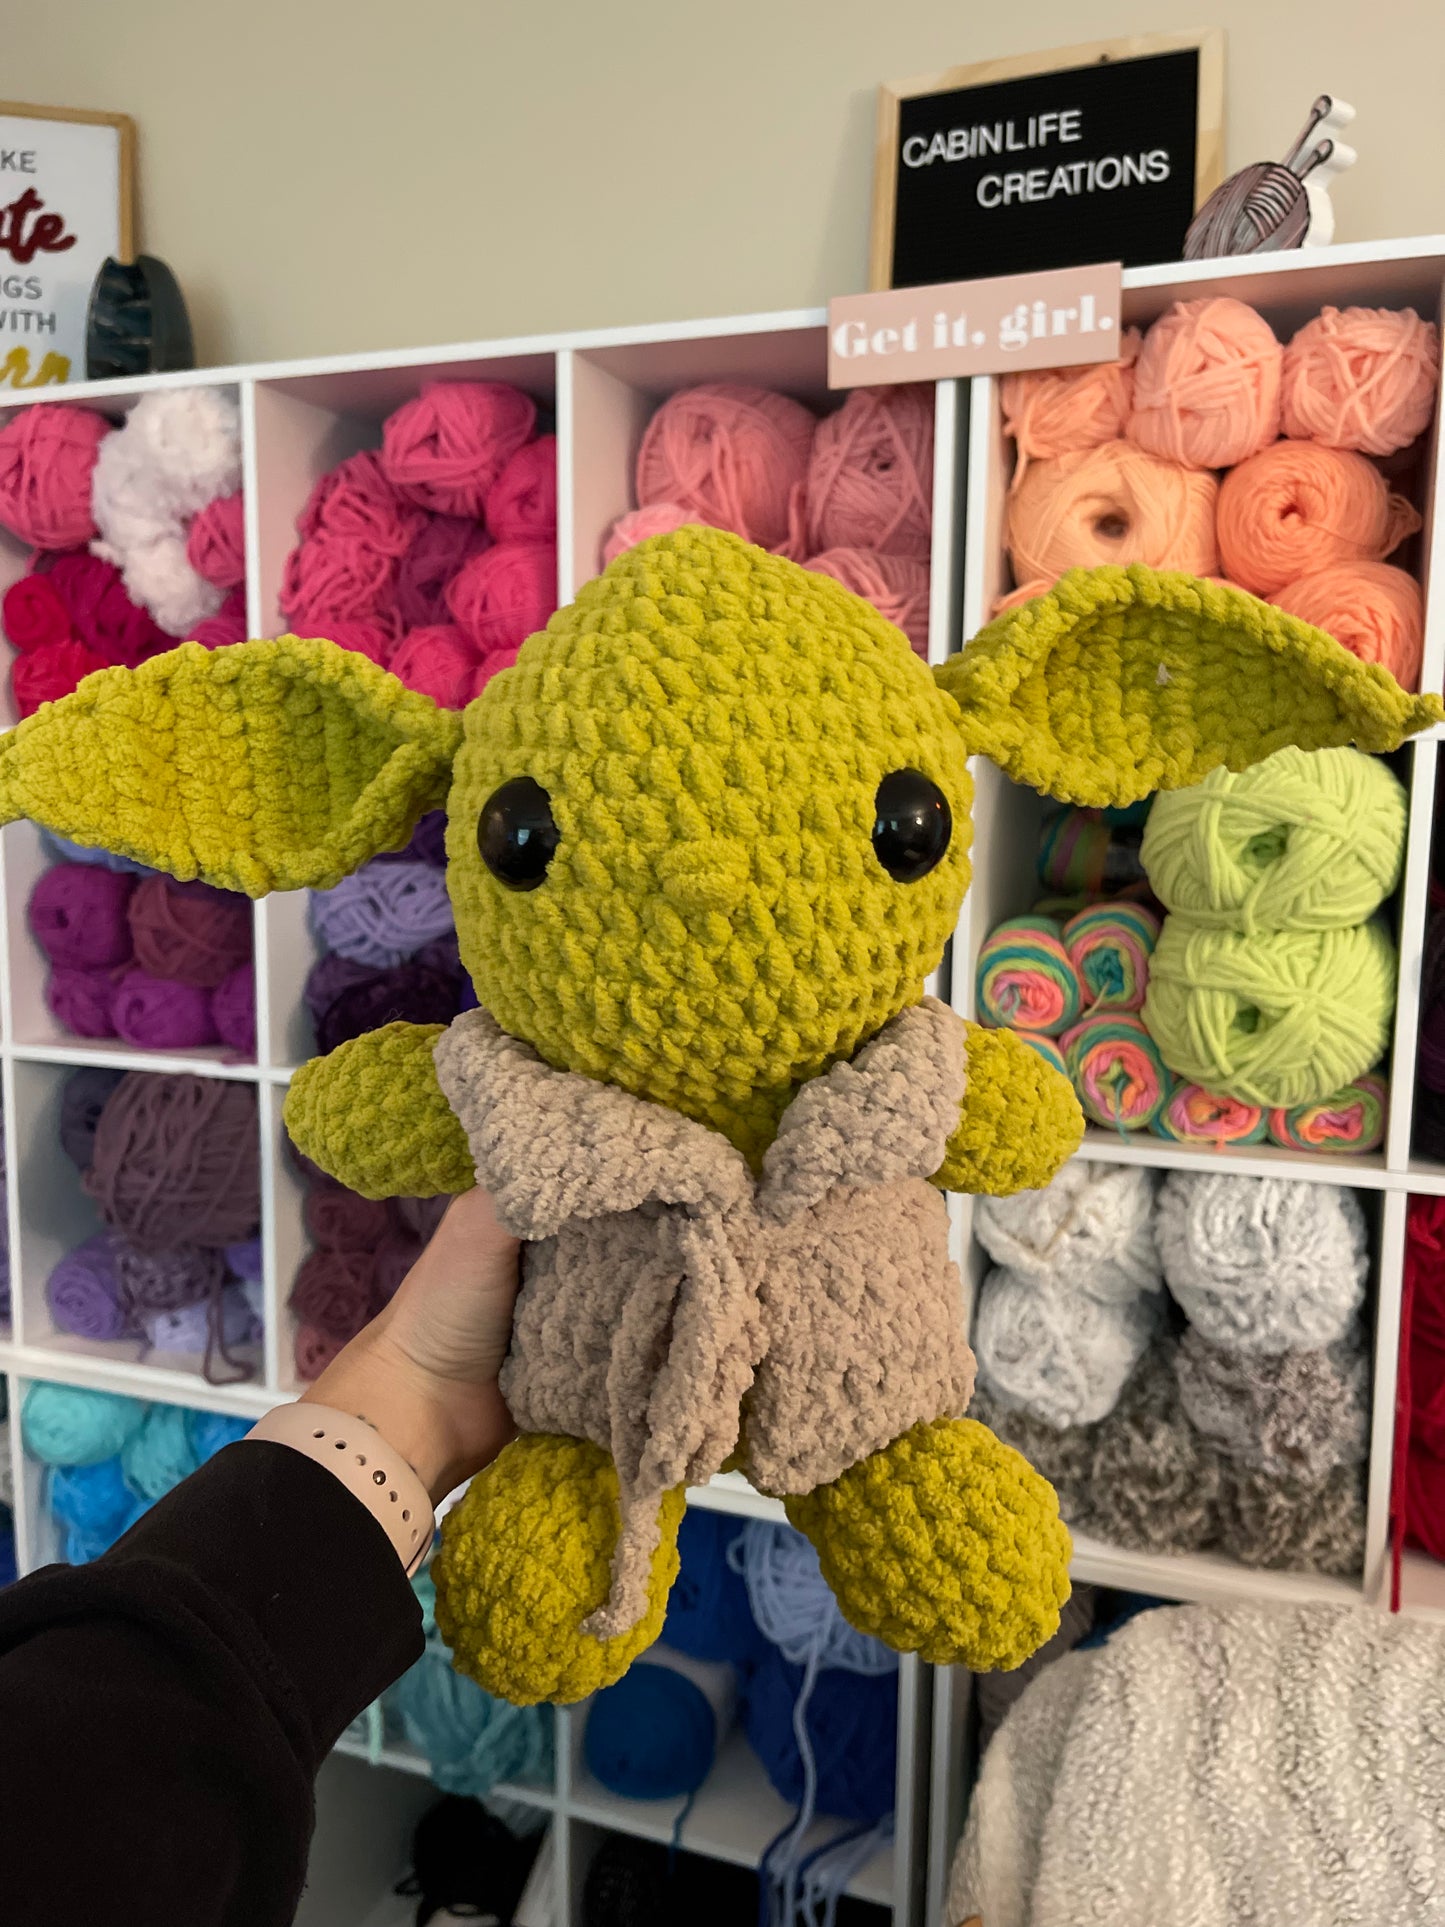 Made to order Crocheted Baby Yoda